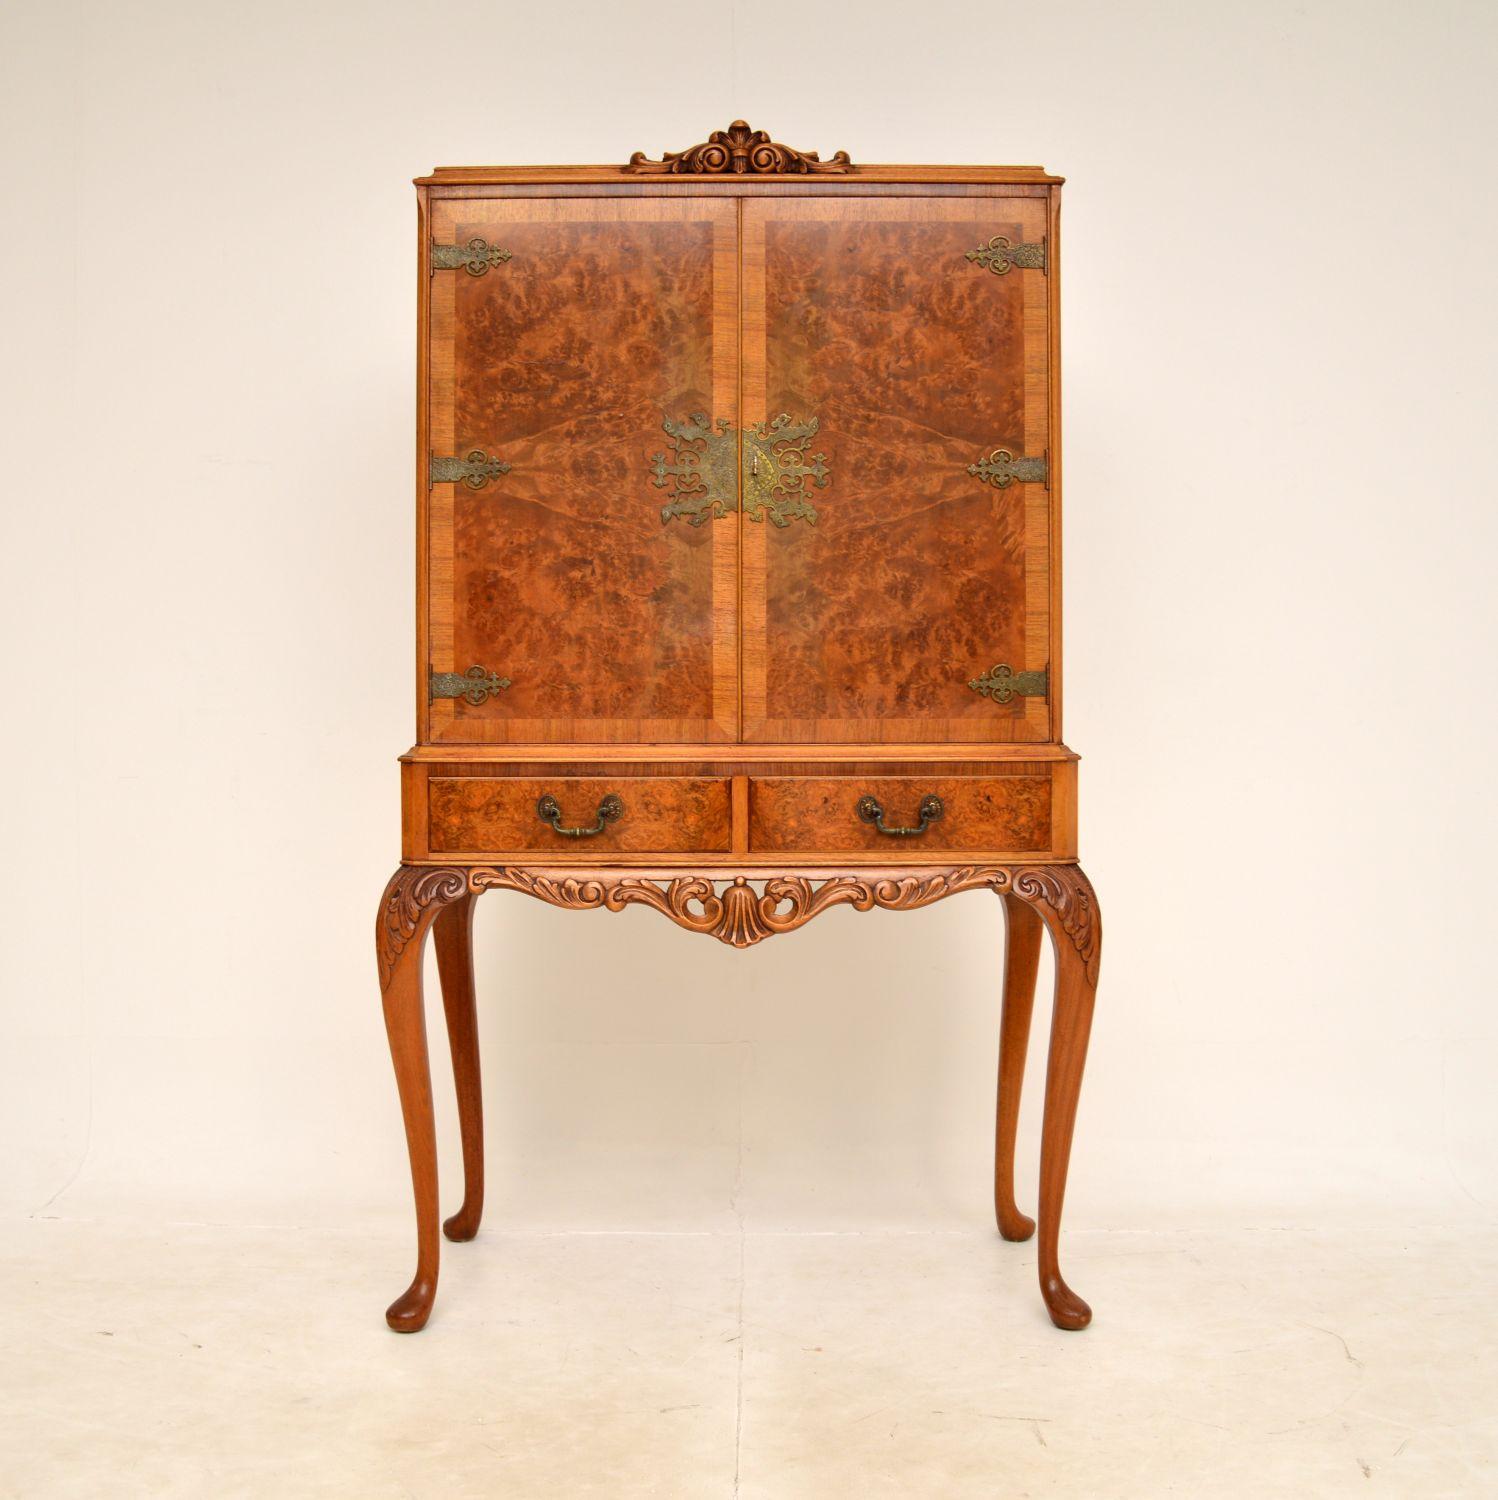 A beautiful antique walnut cocktail drinks cabinet in the Queen Anne style. This was made in England, it dates from around the 1930-1950s.

This is of superb quality, with stunning burr walnut grain patterns, crisp carving and high quality pierced